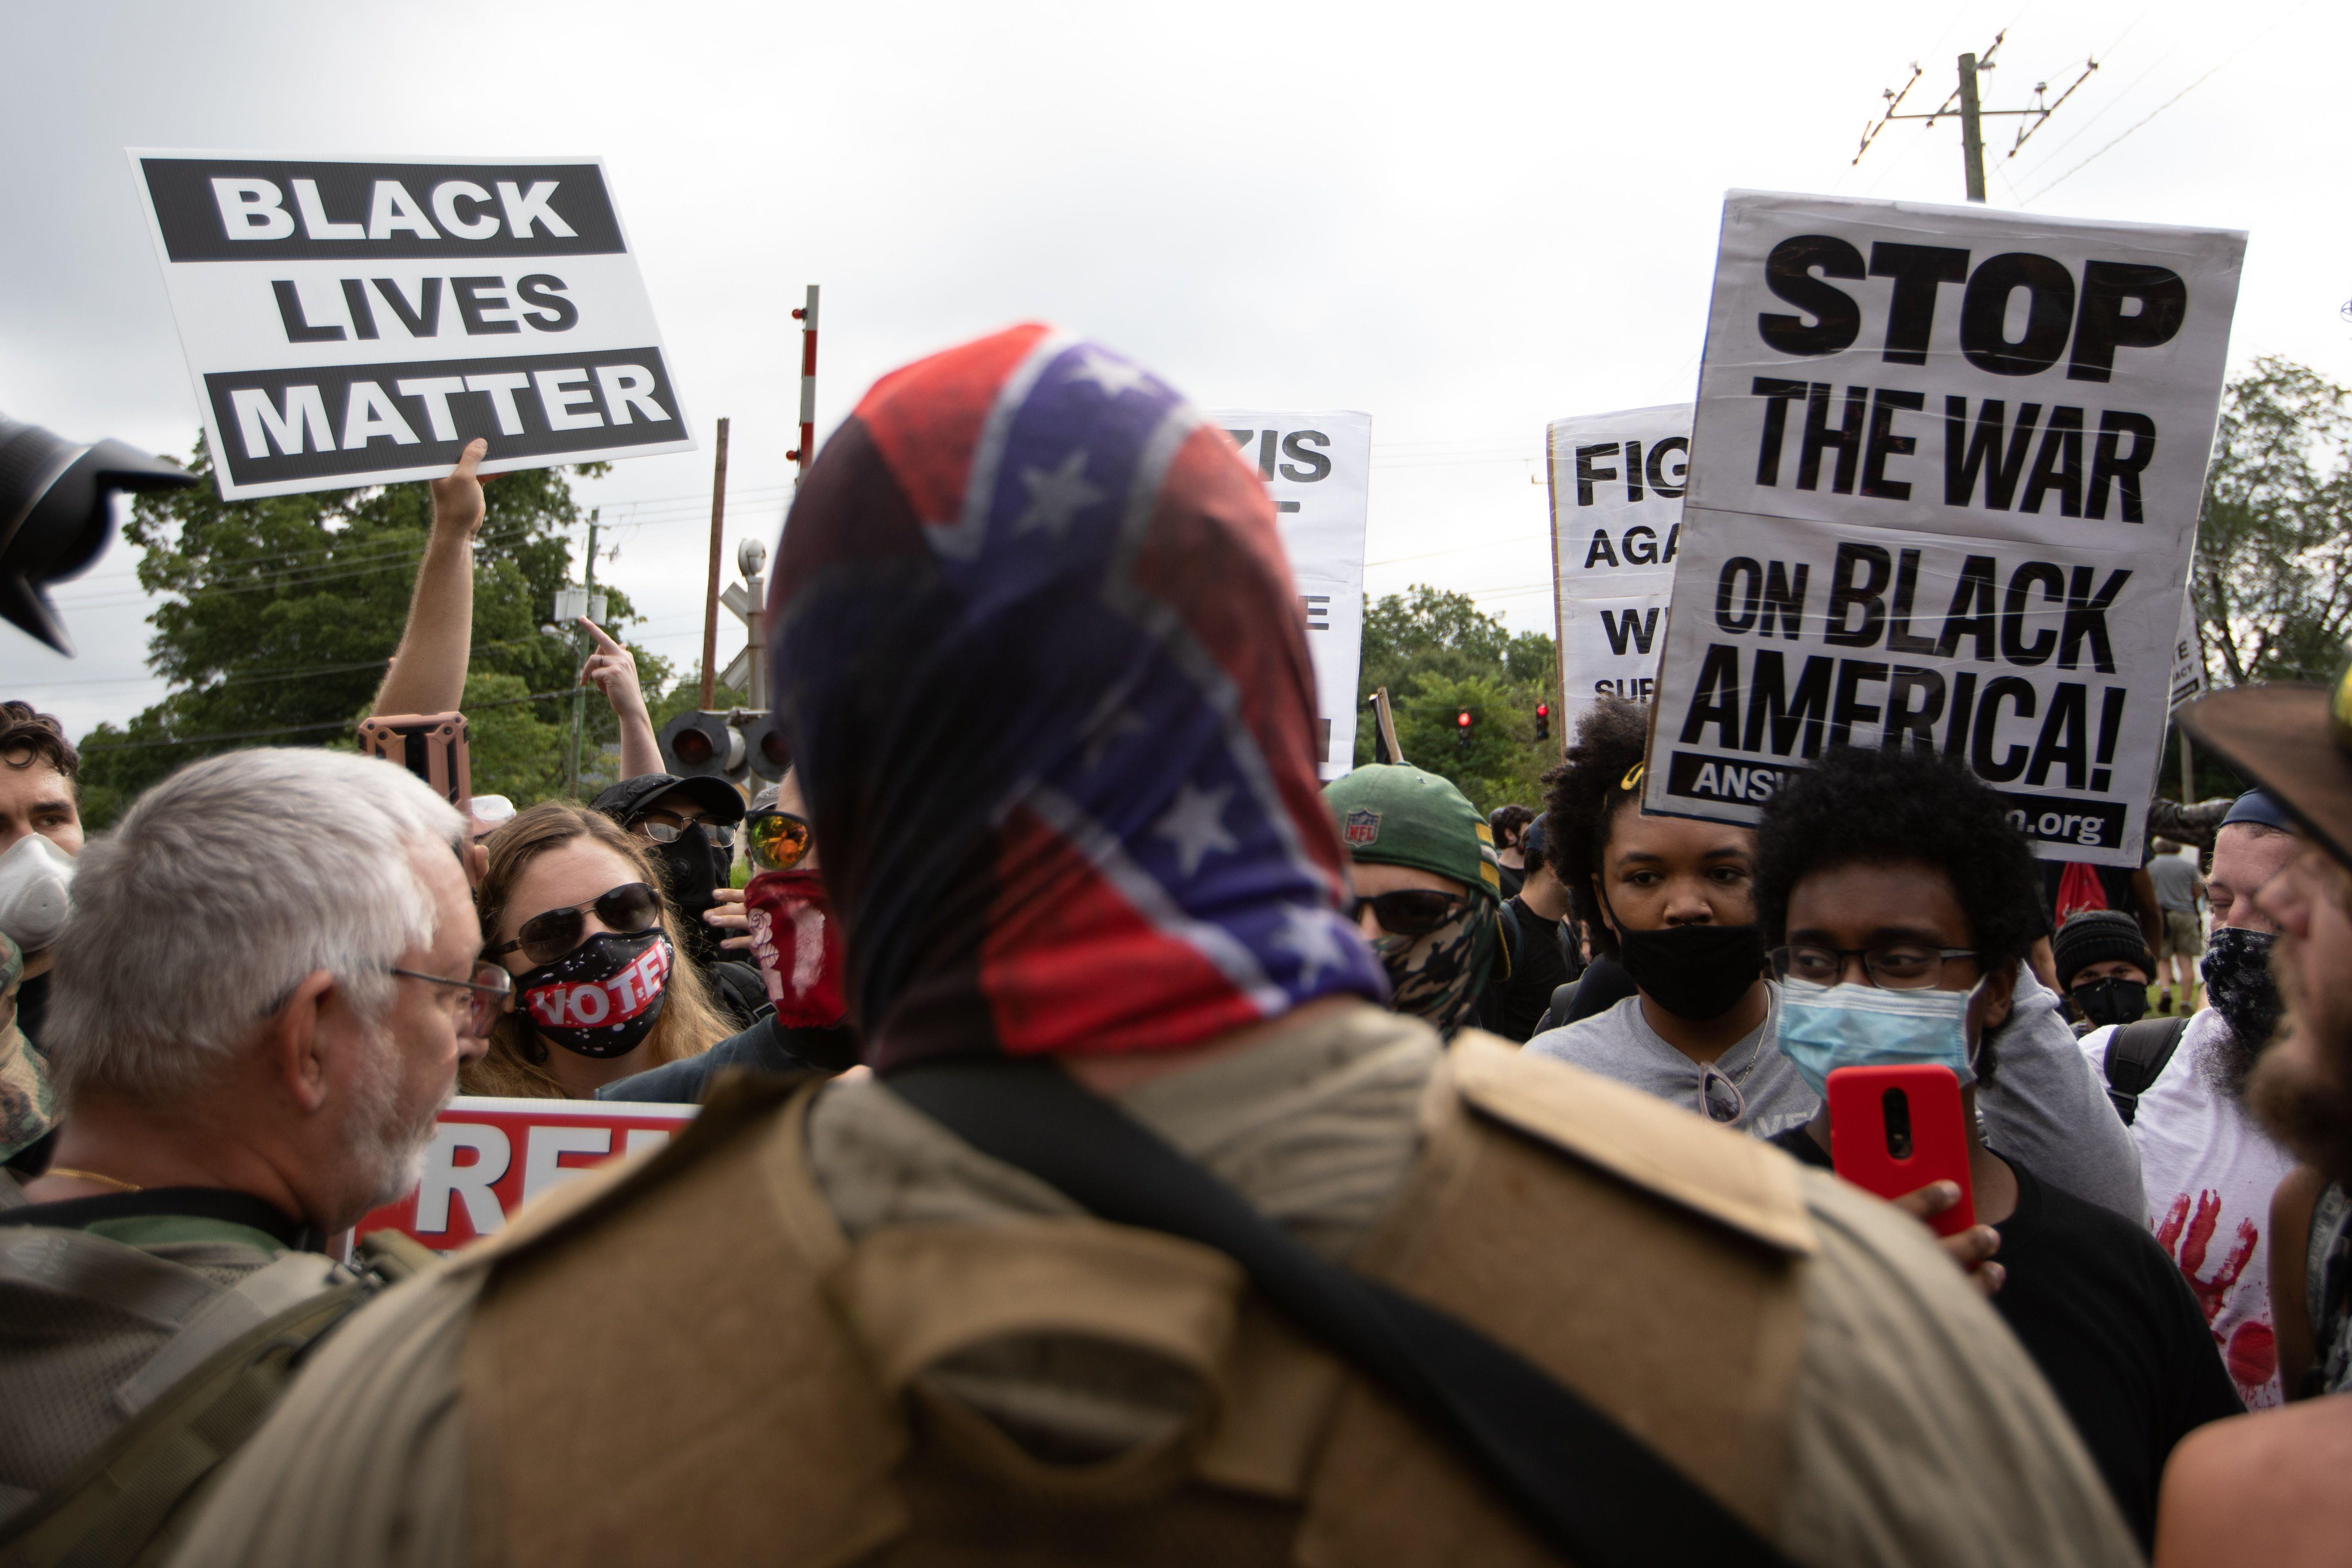 A man in a Confederate flag bandana faces BLM and other anti-racist protesters